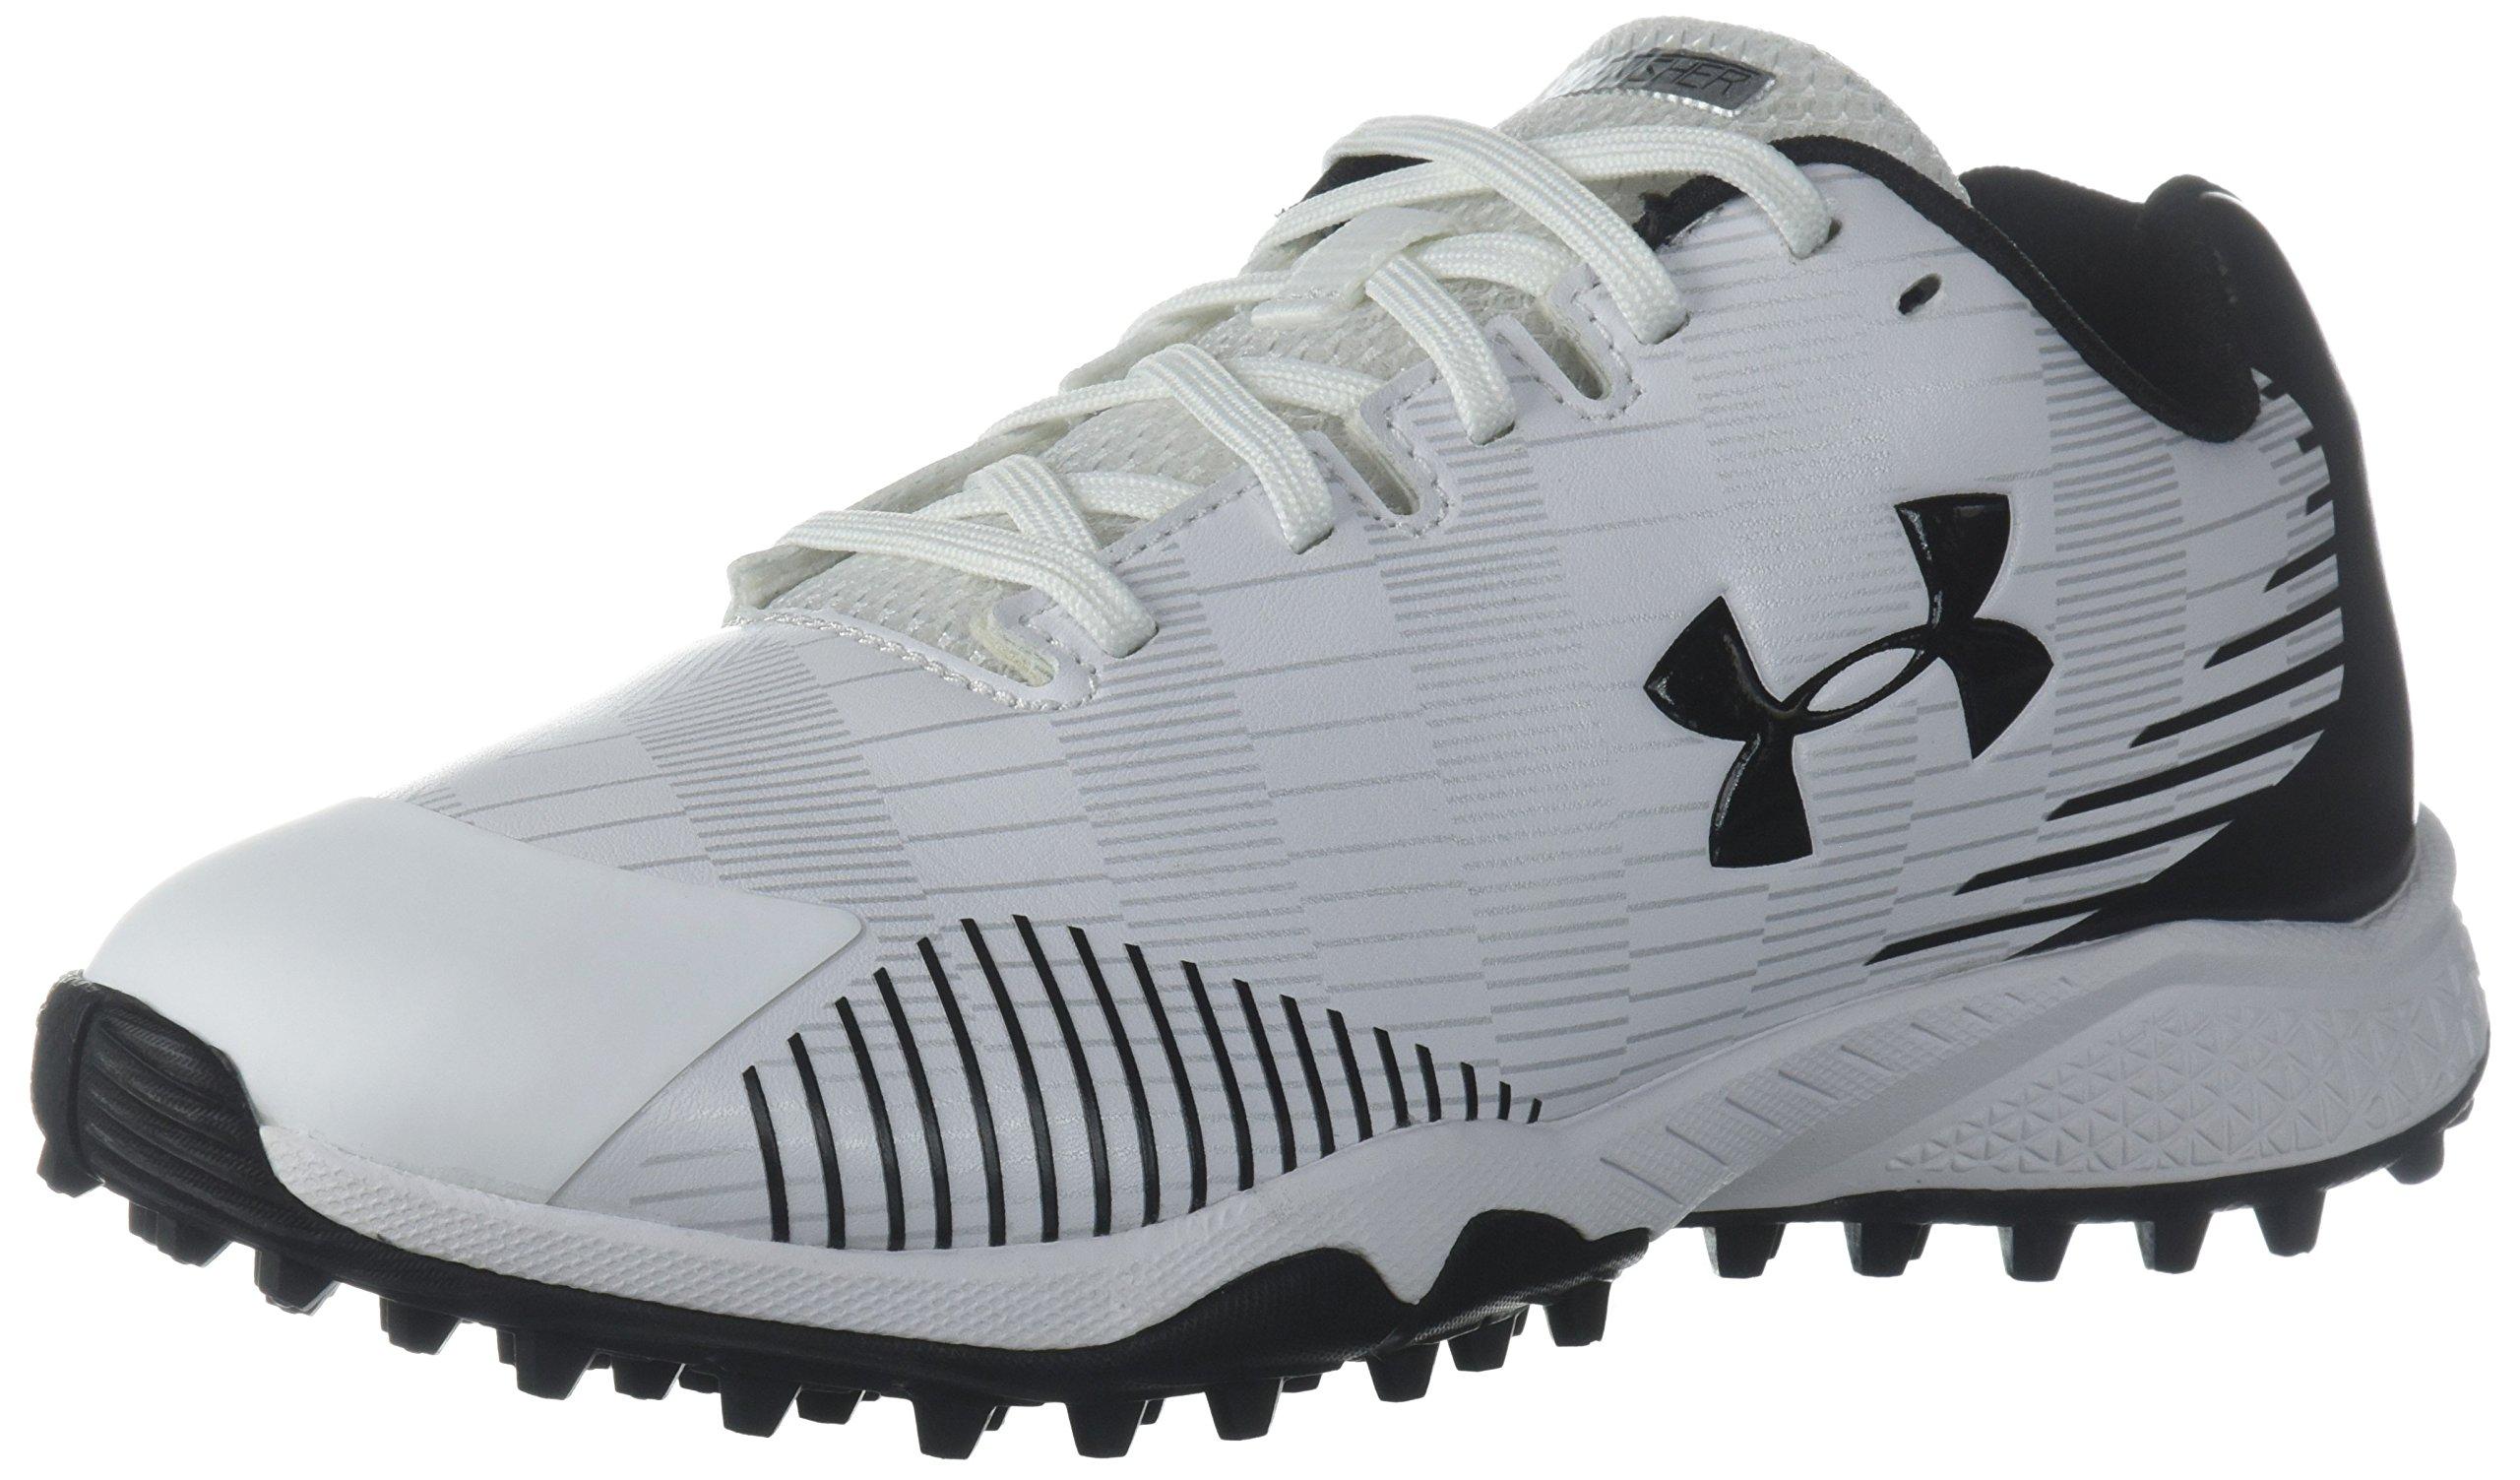 Under Armour Synthetic Womens Lacrosse Finisher Turf Turf